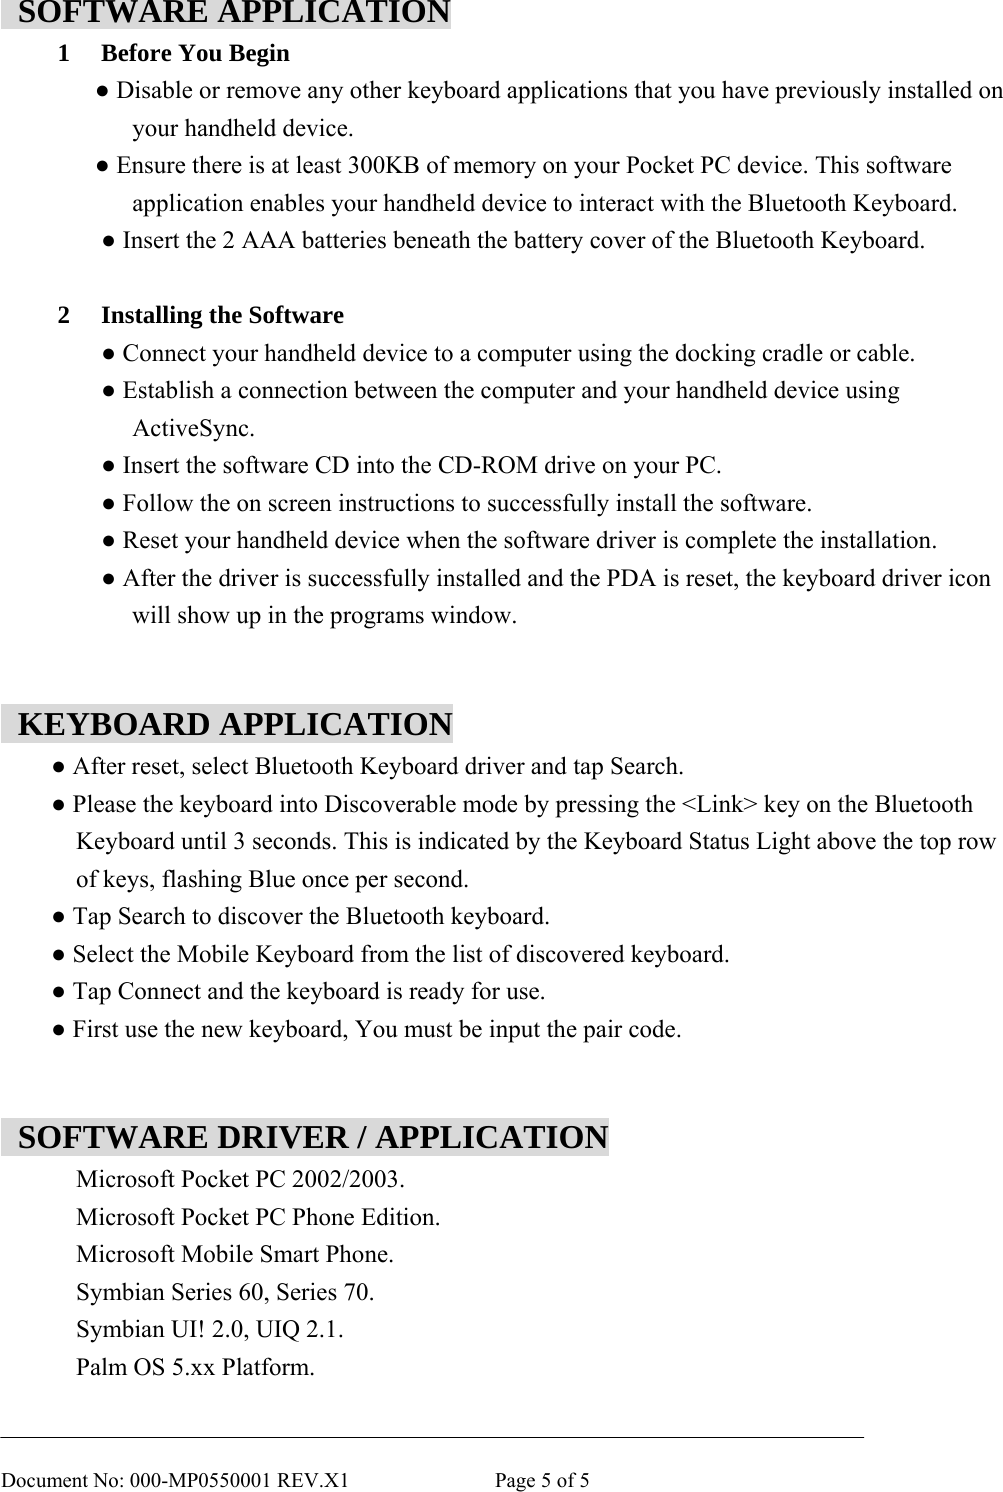       Document No: 000-MP0550001 REV.X1              Page 5 of 5  SOFTWARE APPLICATION 1  Before You Begin ● Disable or remove any other keyboard applications that you have previously installed on your handheld device. ● Ensure there is at least 300KB of memory on your Pocket PC device. This software   application enables your handheld device to interact with the Bluetooth Keyboard.  ● Insert the 2 AAA batteries beneath the battery cover of the Bluetooth Keyboard.  2  Installing the Software  ● Connect your handheld device to a computer using the docking cradle or cable.  ● Establish a connection between the computer and your handheld device using   ActiveSync.  ● Insert the software CD into the CD-ROM drive on your PC.  ● Follow the on screen instructions to successfully install the software.  ● Reset your handheld device when the software driver is complete the installation.  ● After the driver is successfully installed and the PDA is reset, the keyboard driver icon   will show up in the programs window.    KEYBOARD APPLICATION  ● After reset, select Bluetooth Keyboard driver and tap Search.  ● Please the keyboard into Discoverable mode by pressing the &lt;Link&gt; key on the Bluetooth   Keyboard until 3 seconds. This is indicated by the Keyboard Status Light above the top row of keys, flashing Blue once per second.  ● Tap Search to discover the Bluetooth keyboard.  ● Select the Mobile Keyboard from the list of discovered keyboard.  ● Tap Connect and the keyboard is ready for use.  ● First use the new keyboard, You must be input the pair code.     SOFTWARE DRIVER / APPLICATION Microsoft Pocket PC 2002/2003. Microsoft Pocket PC Phone Edition. Microsoft Mobile Smart Phone. Symbian Series 60, Series 70. Symbian UI! 2.0, UIQ 2.1. Palm OS 5.xx Platform. 